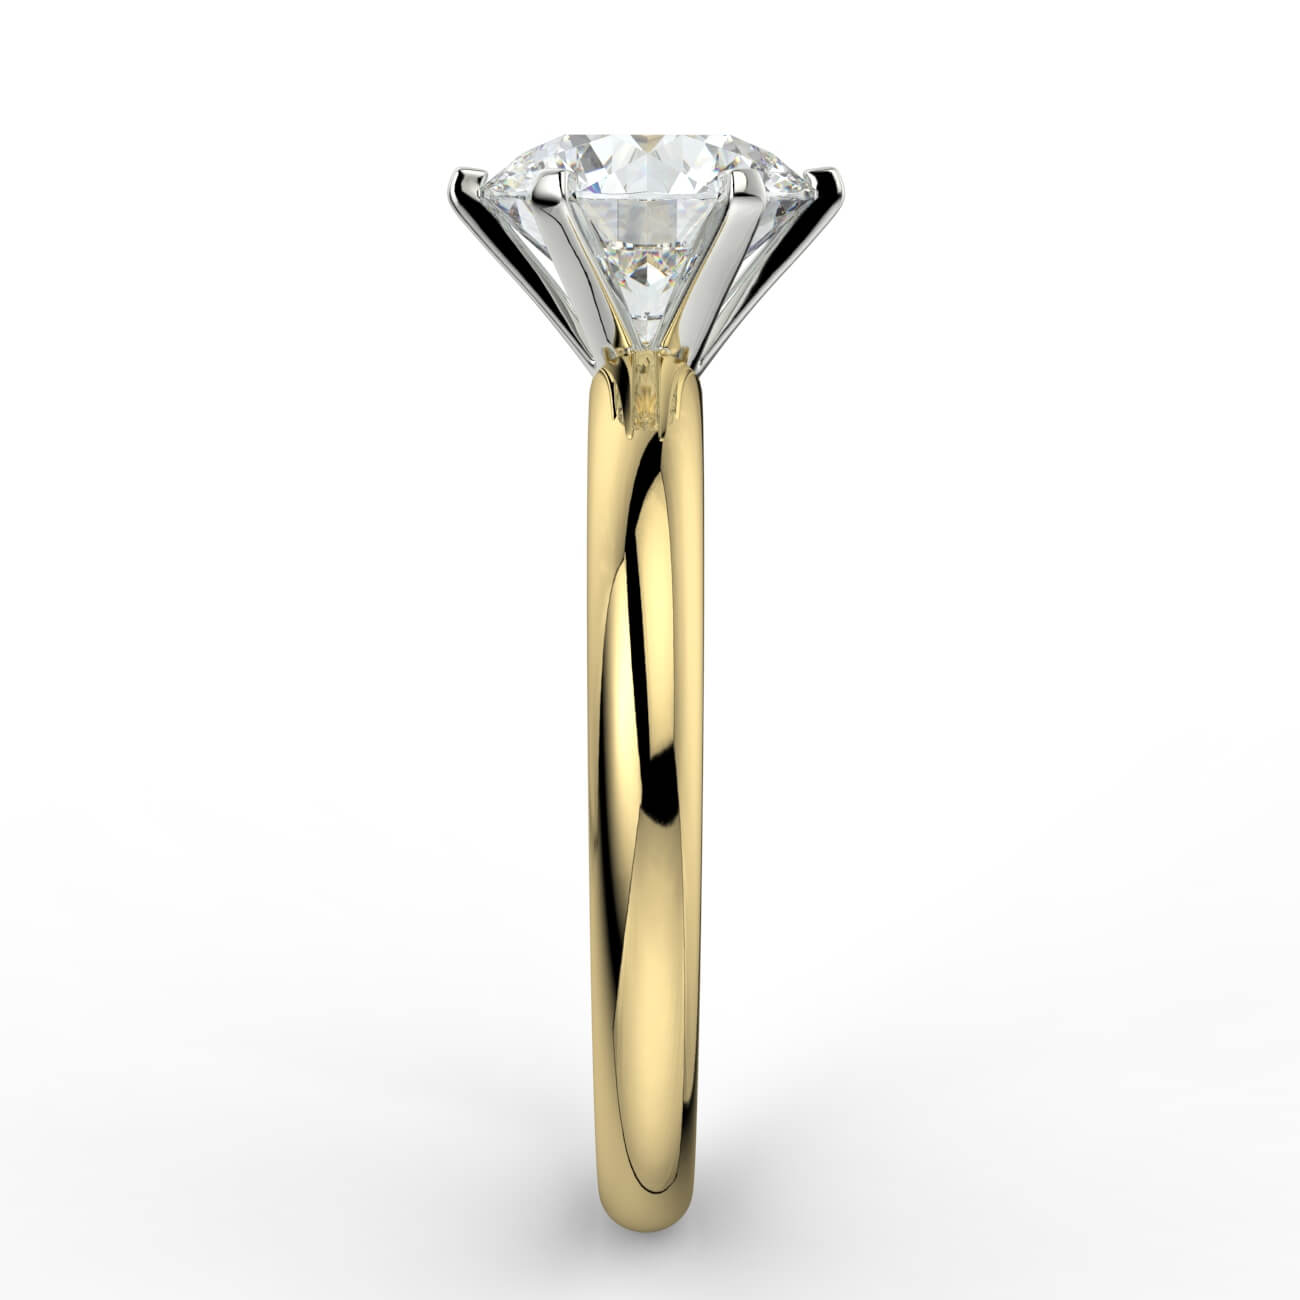 Solitaire diamond engagement ring in yellow and white gold – Australian Diamond Network